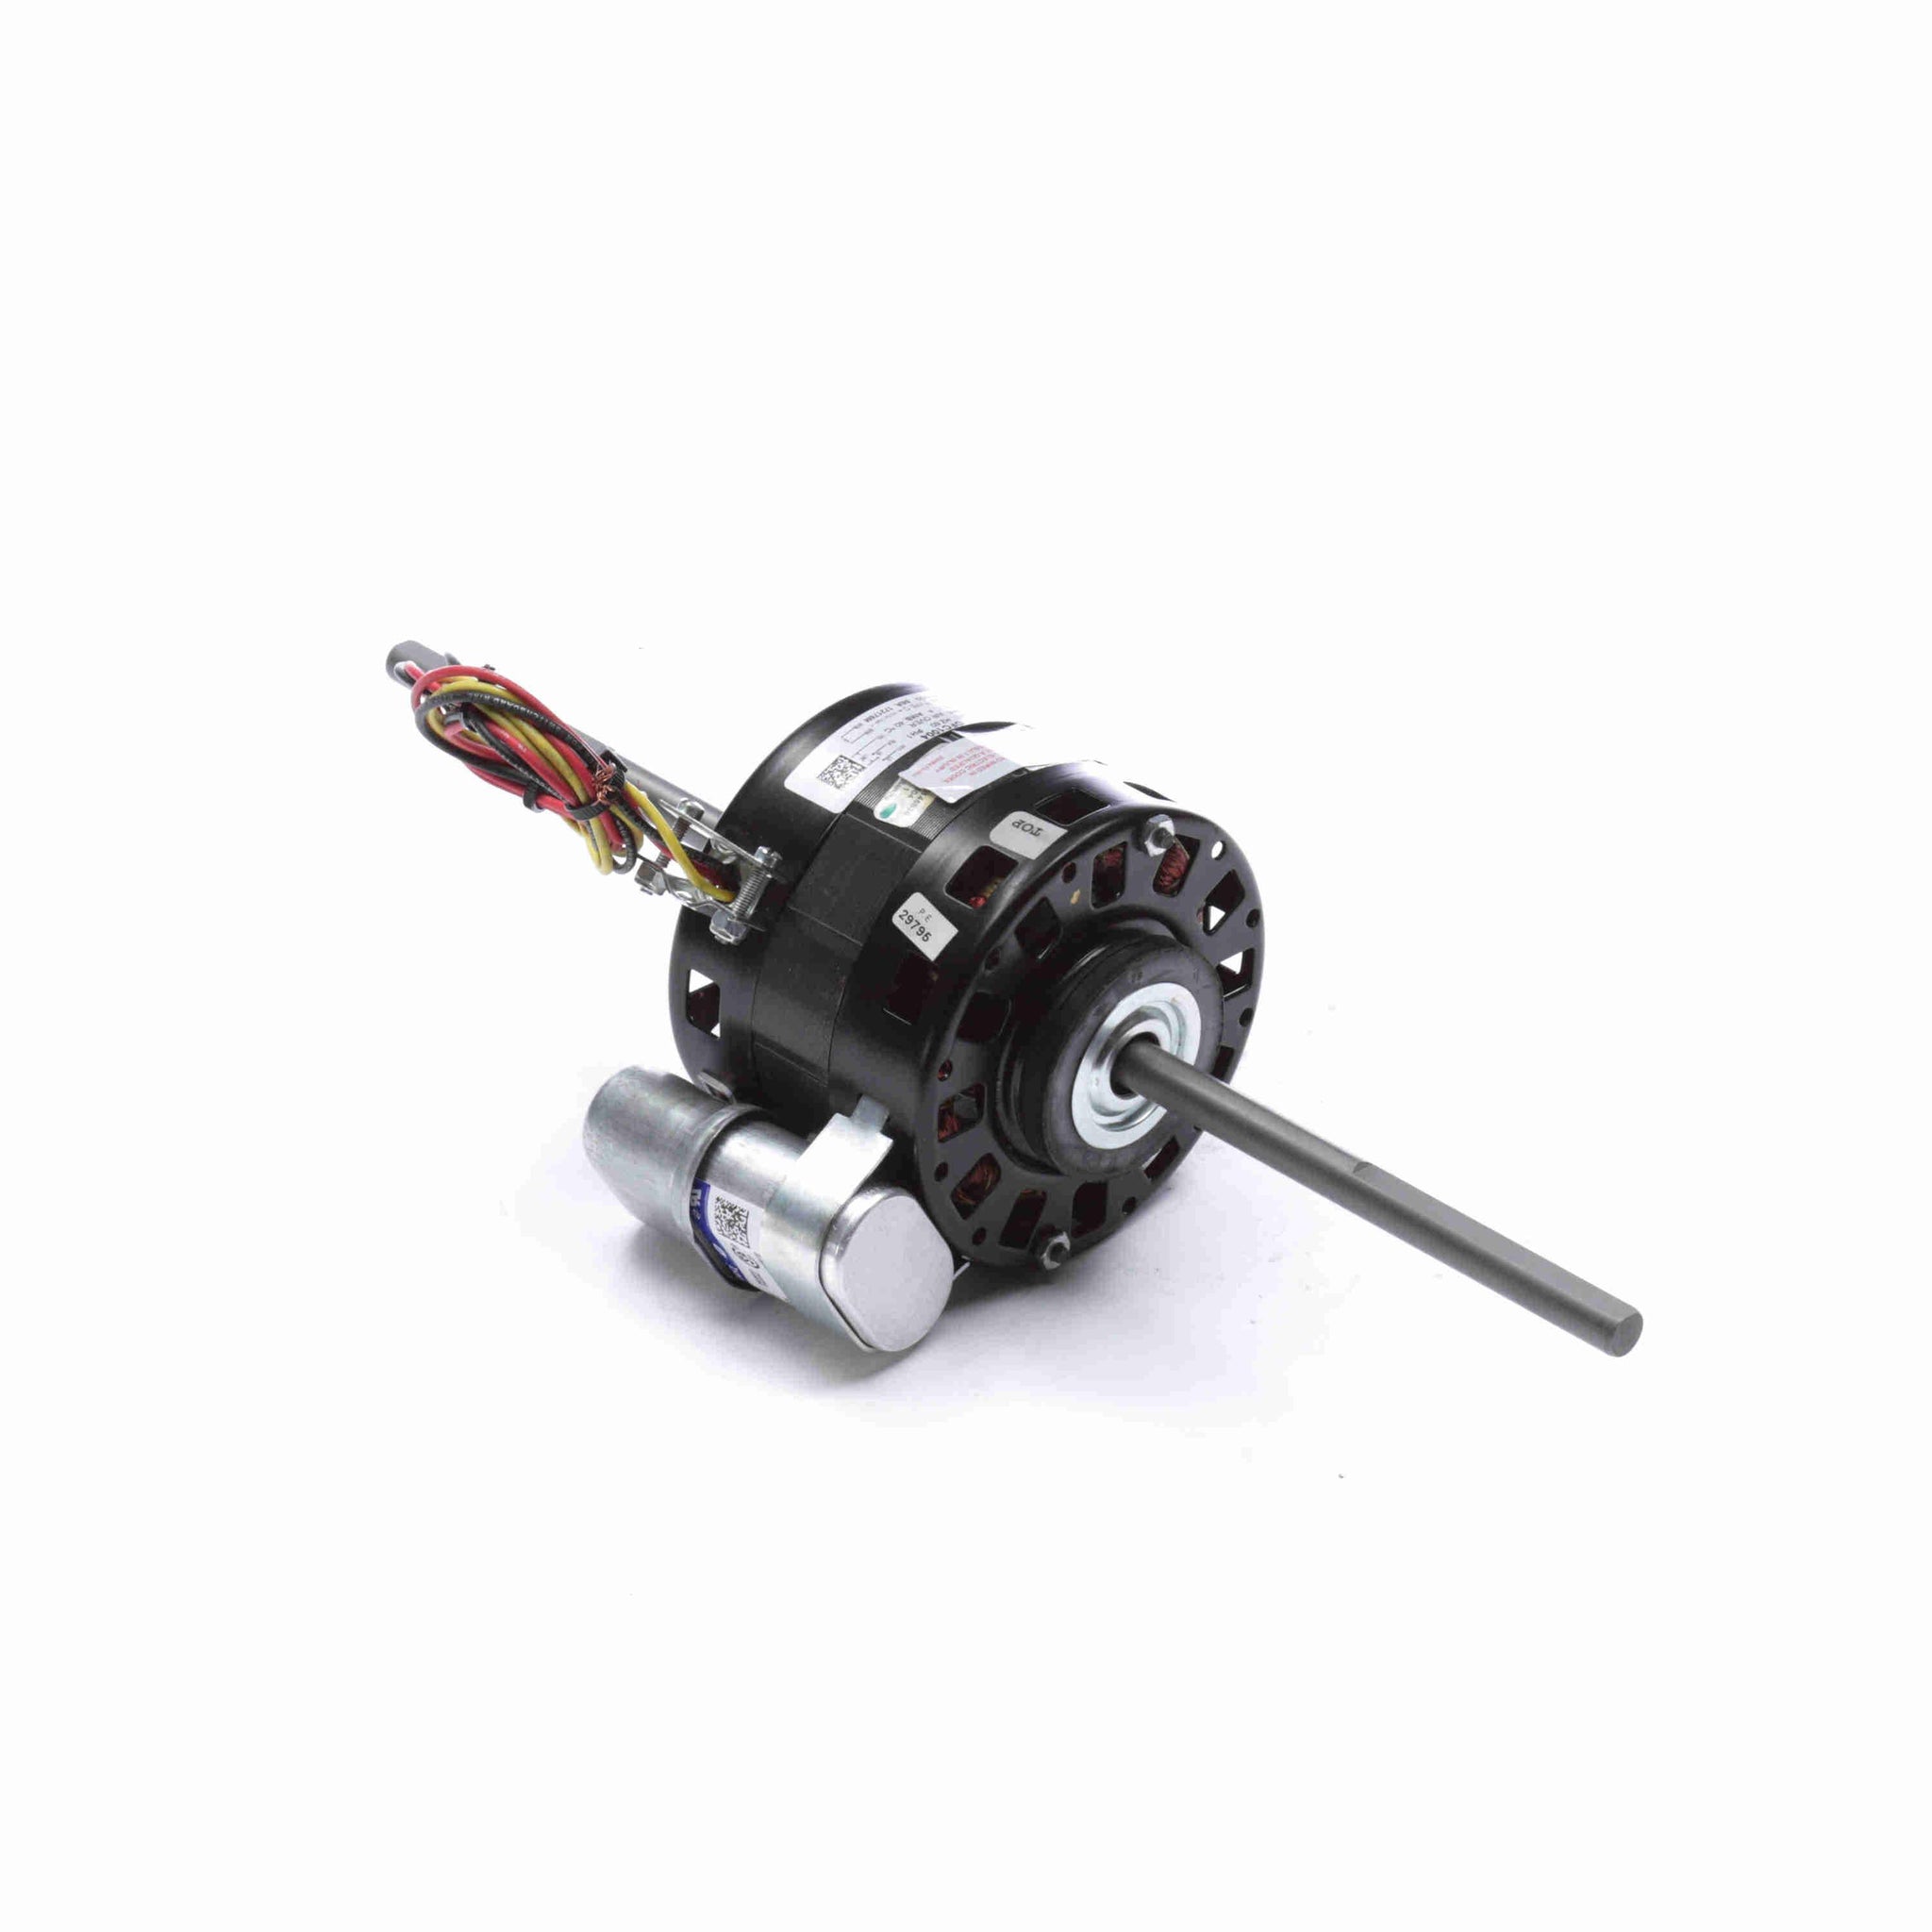 OFC1004 - 1/8 HP OEM Replacement Motor, 1500 RPM, 2 Speed, 208-230 Volts, 42 Frame, OAO - Hardware & Moreee